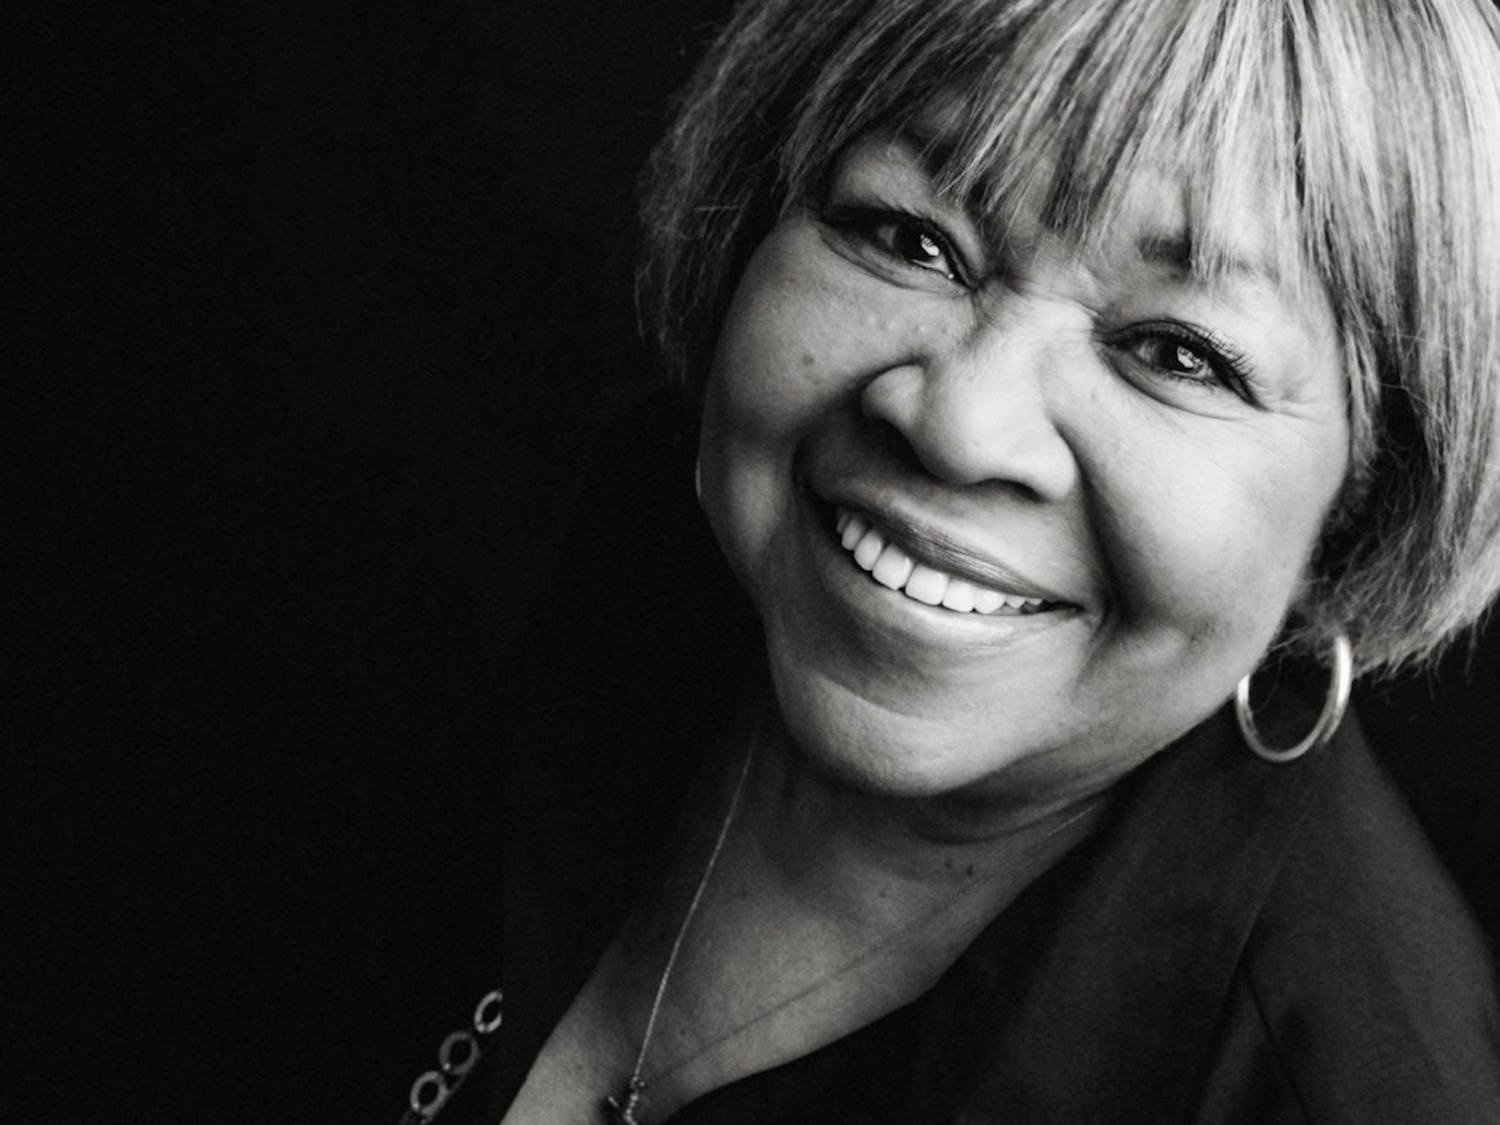 The rhythm and blues artist Mavis Staples — a “staple” of American music — is set to perform at the historic Carolina Theatre Oct. 3.